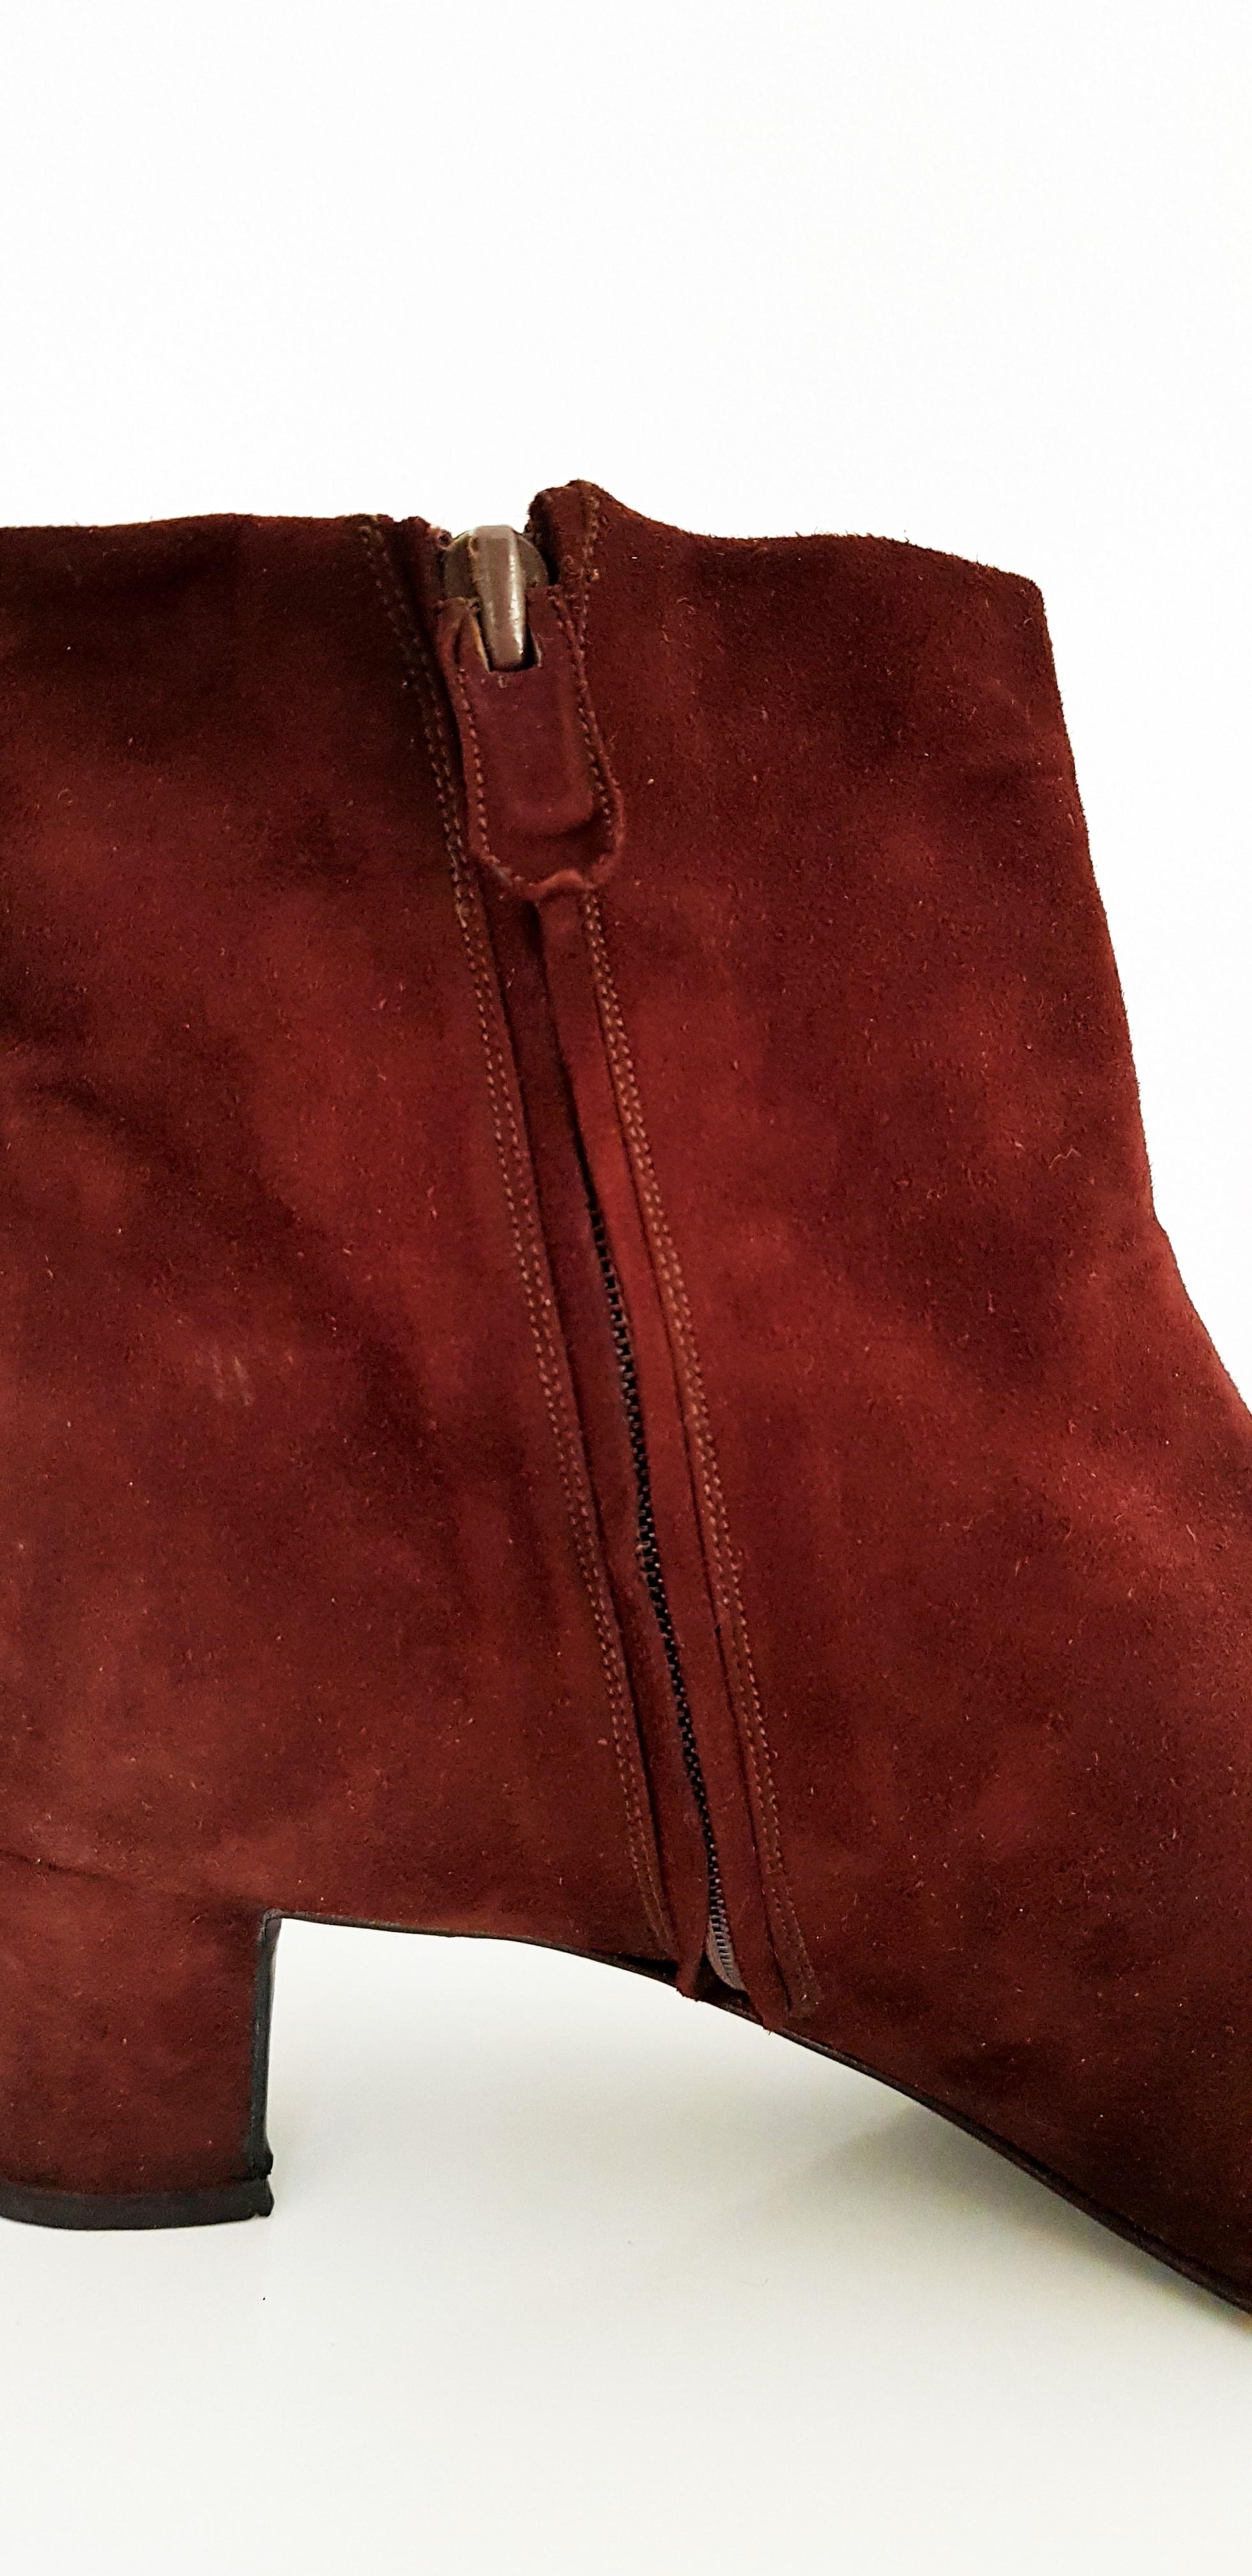 Valentino Couture Brown Suede Zip Ankle Boots - NEW, size 40 (EU) For Sale 4